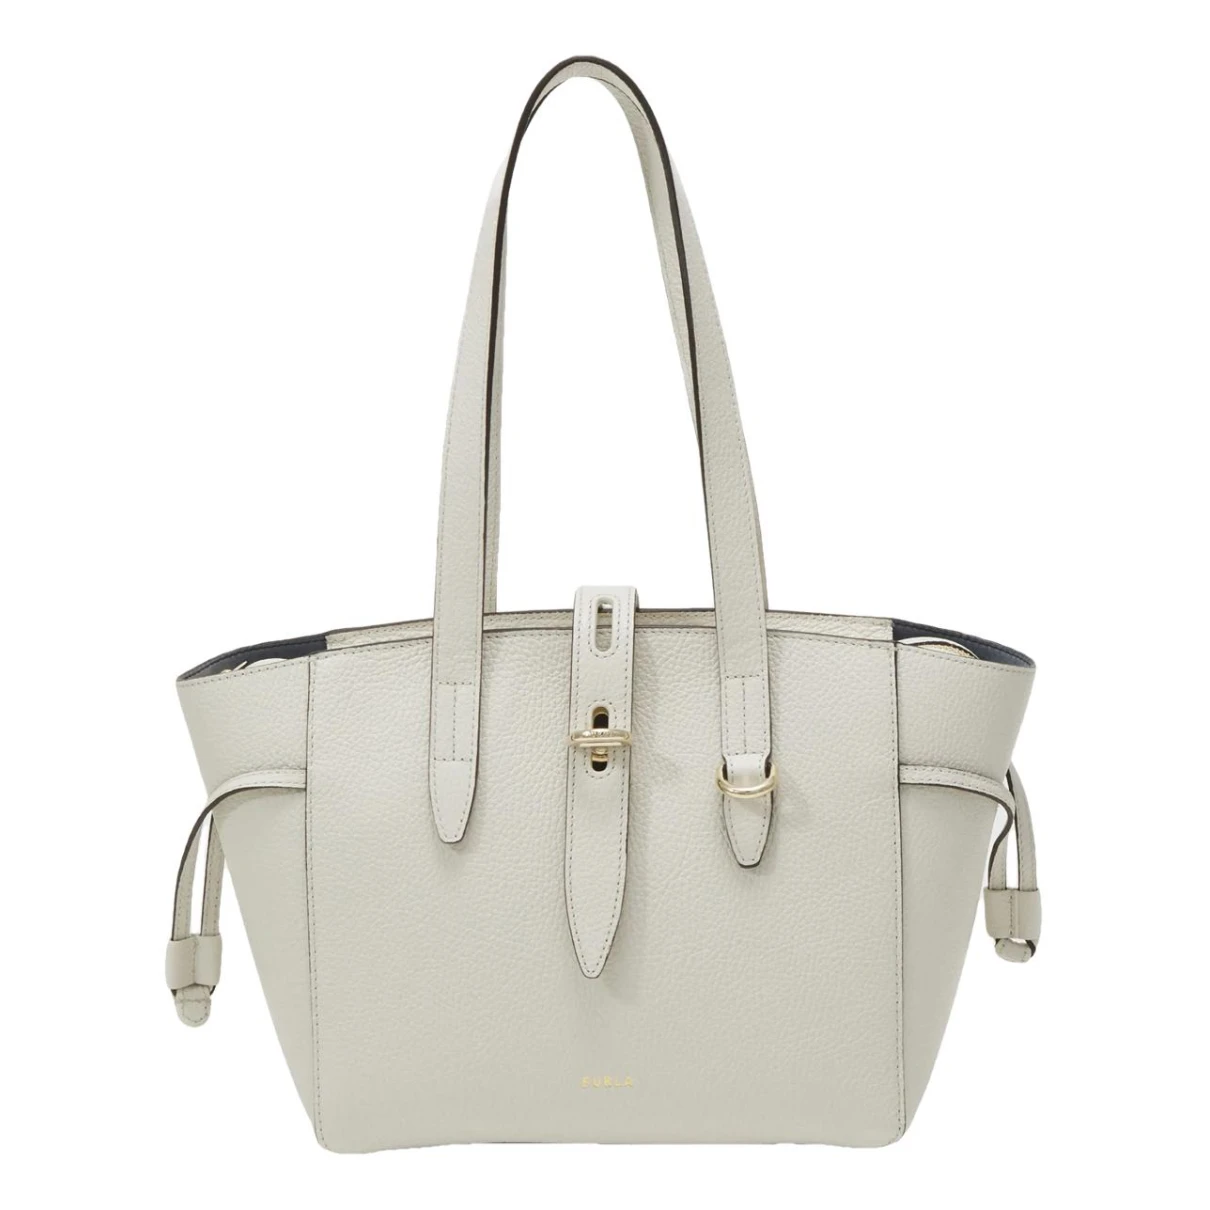 Pre-owned Furla Leather Tote In White